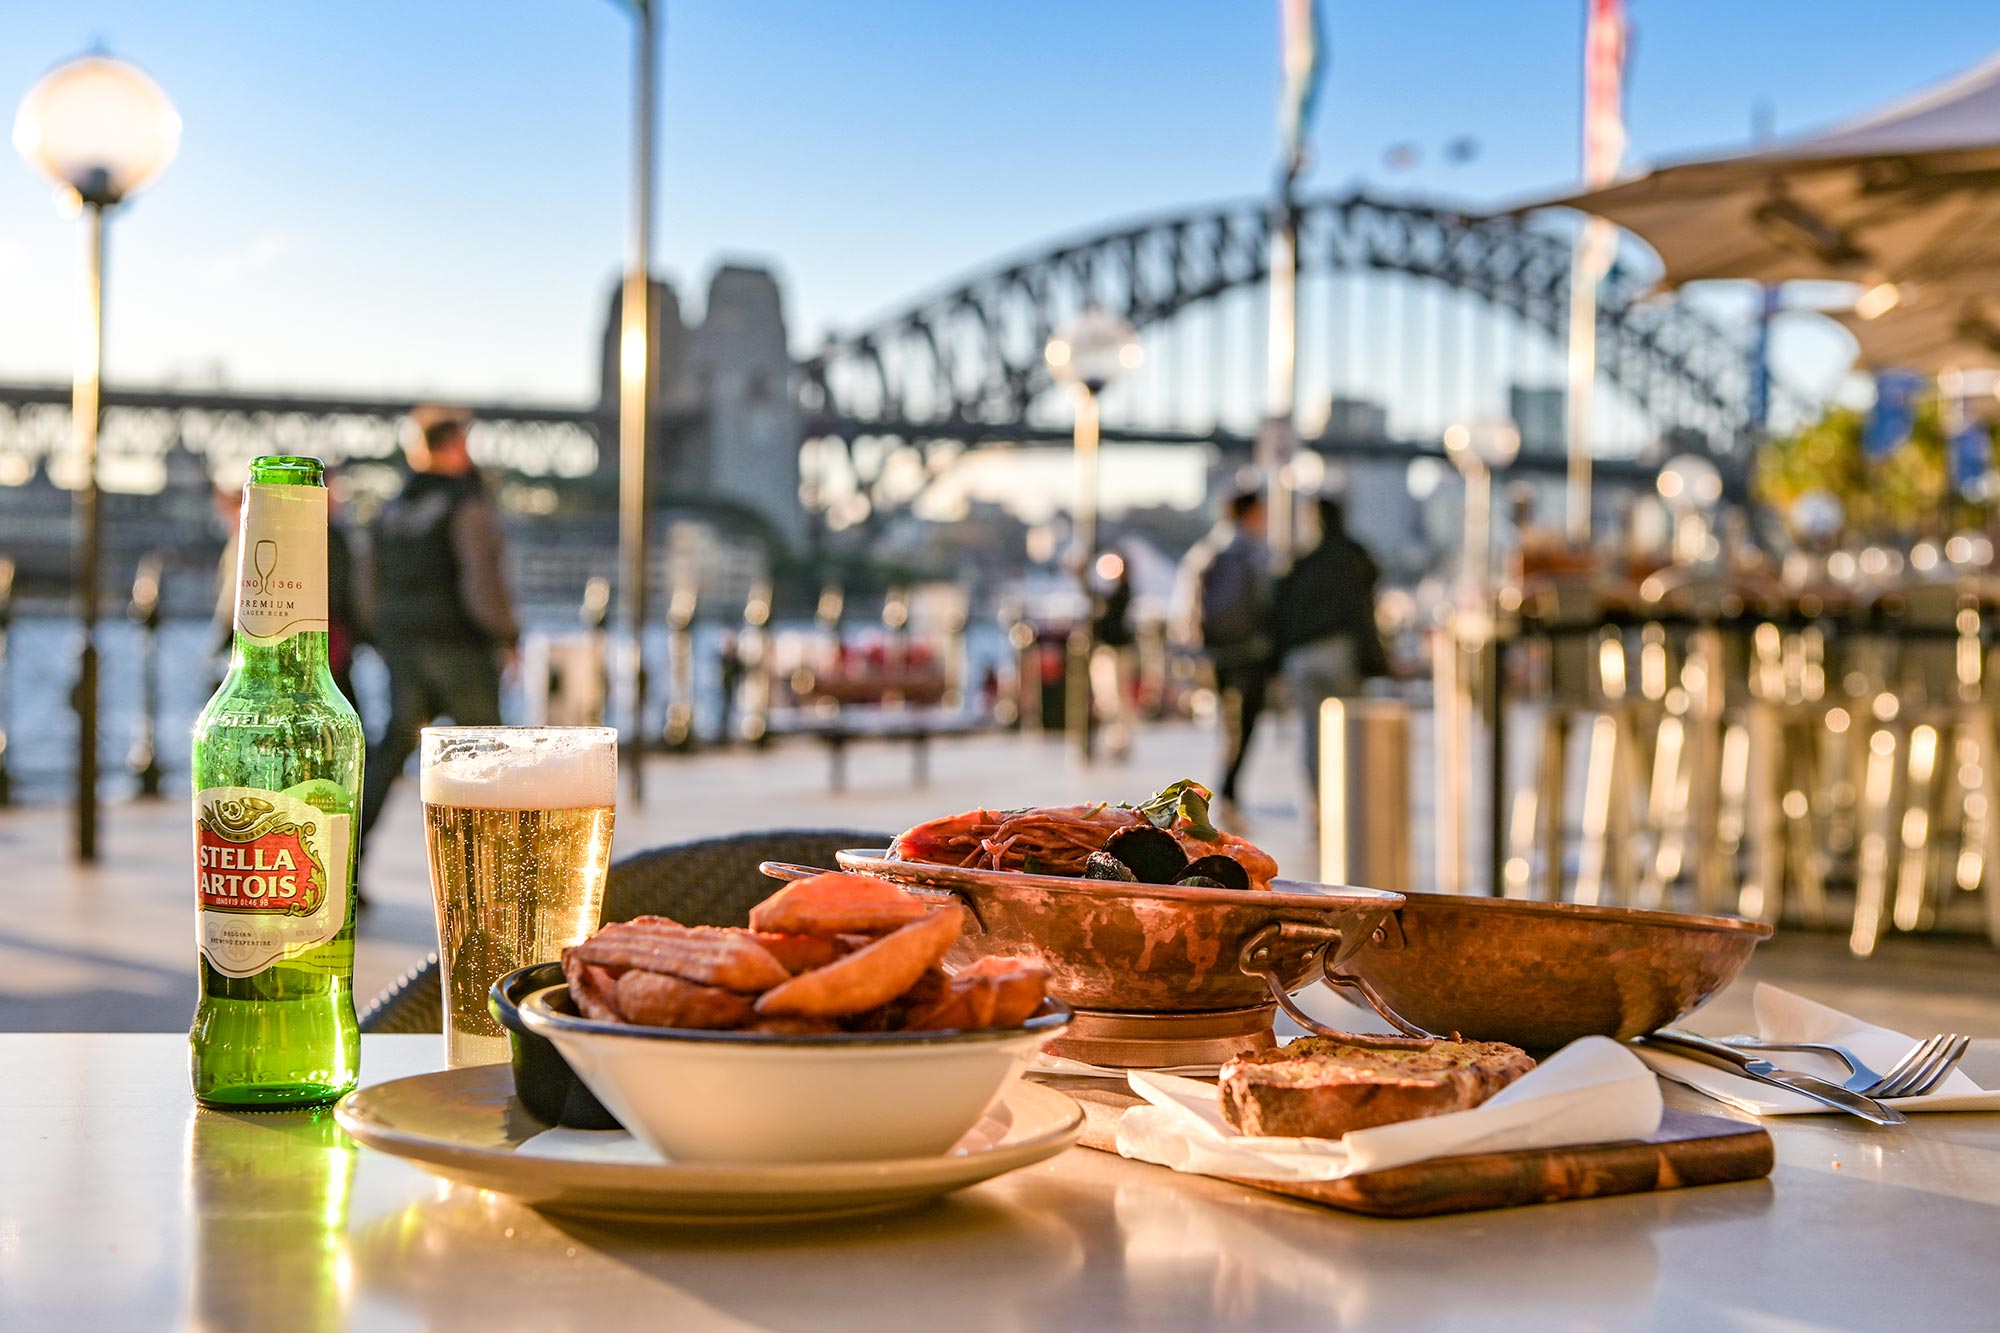 Eastbank Cafe Restaurant – seafood and beer on Circular Quay promenade